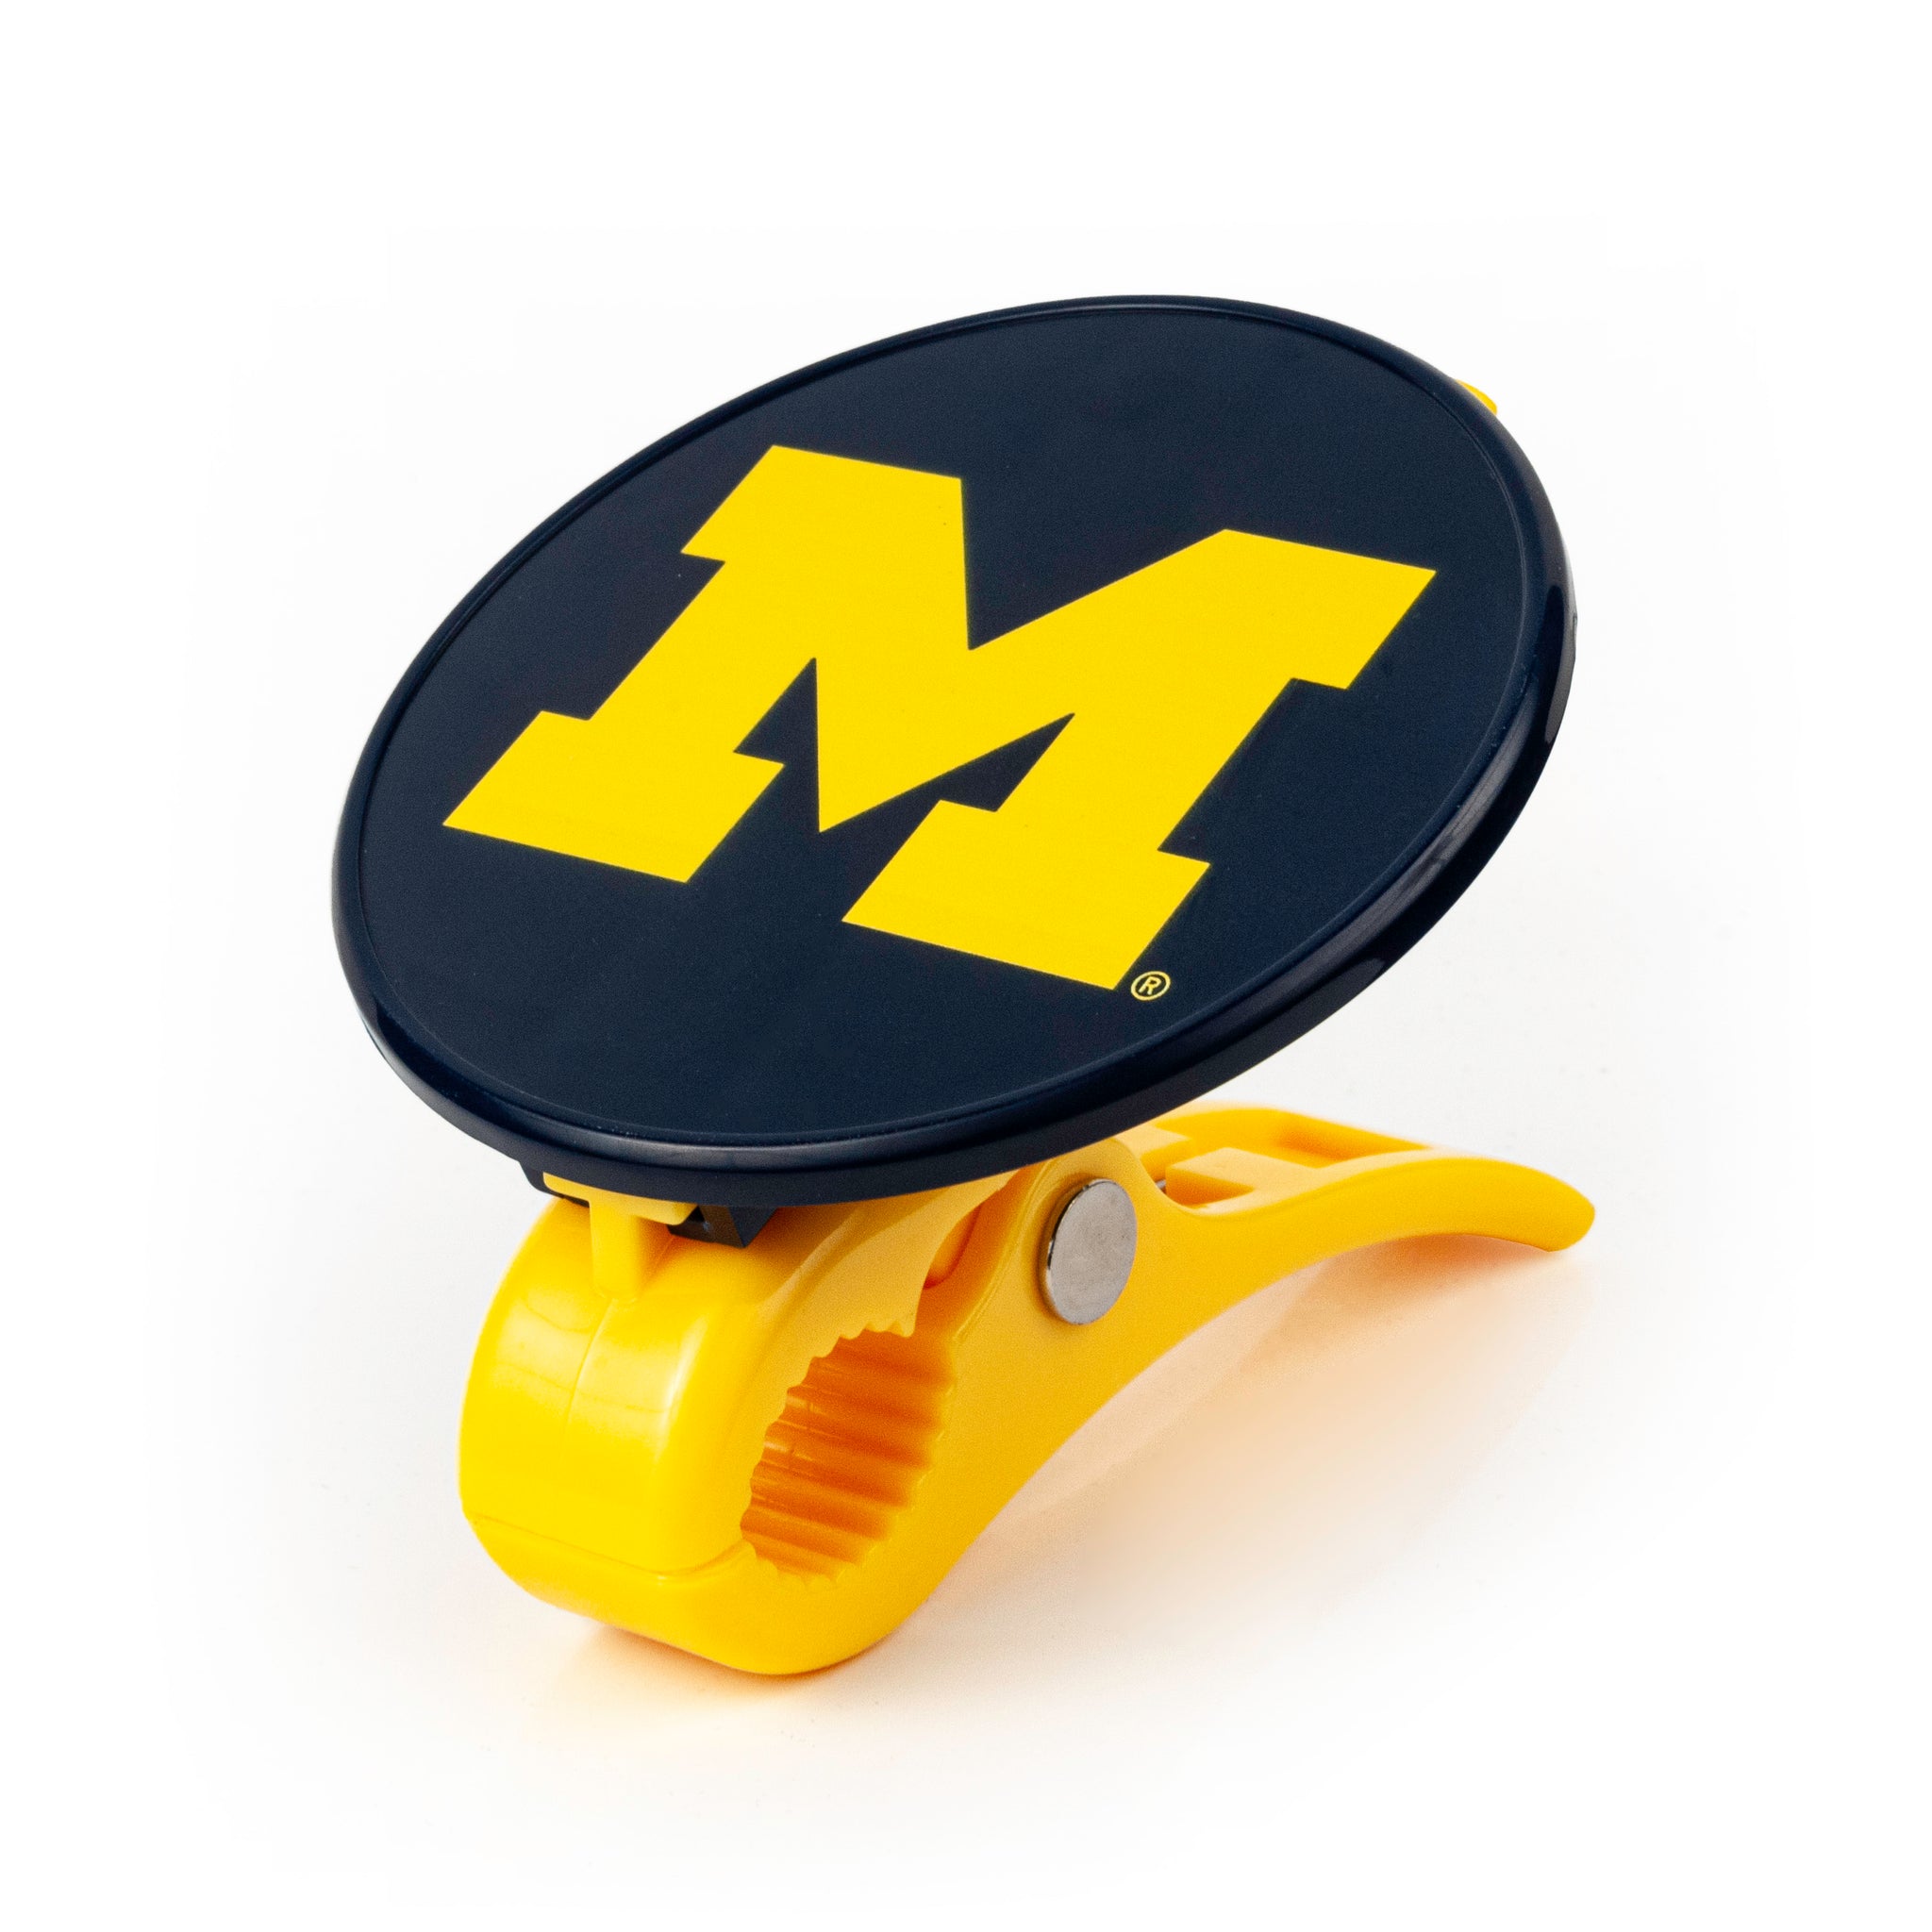 Michigan Wolverines Towel Clips (2 Pack)